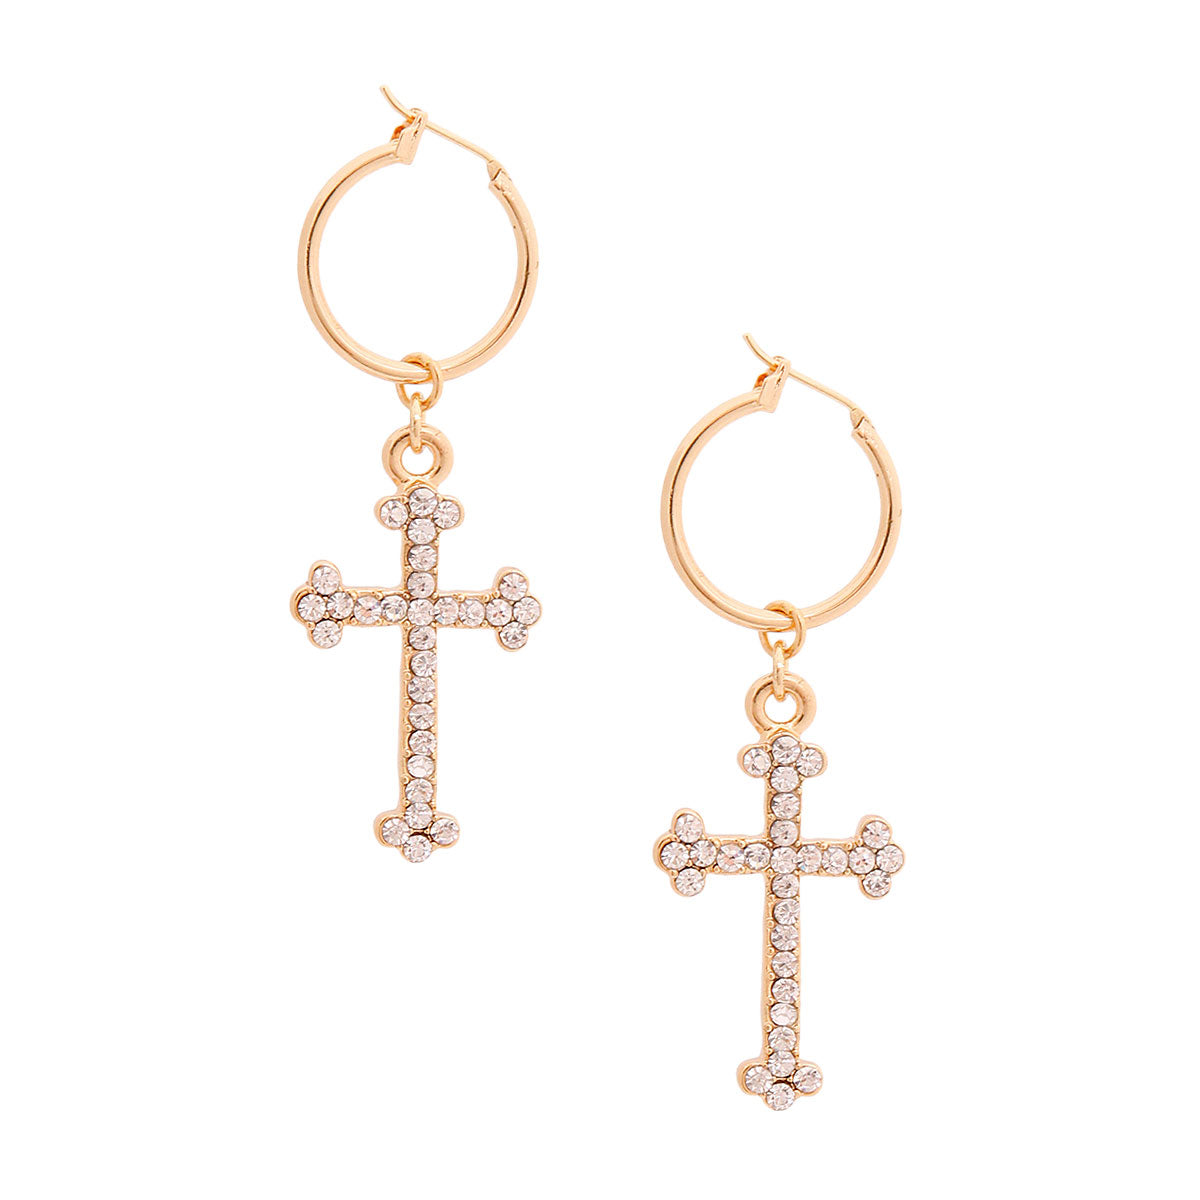 Gold Pave Cross Baby Hoops